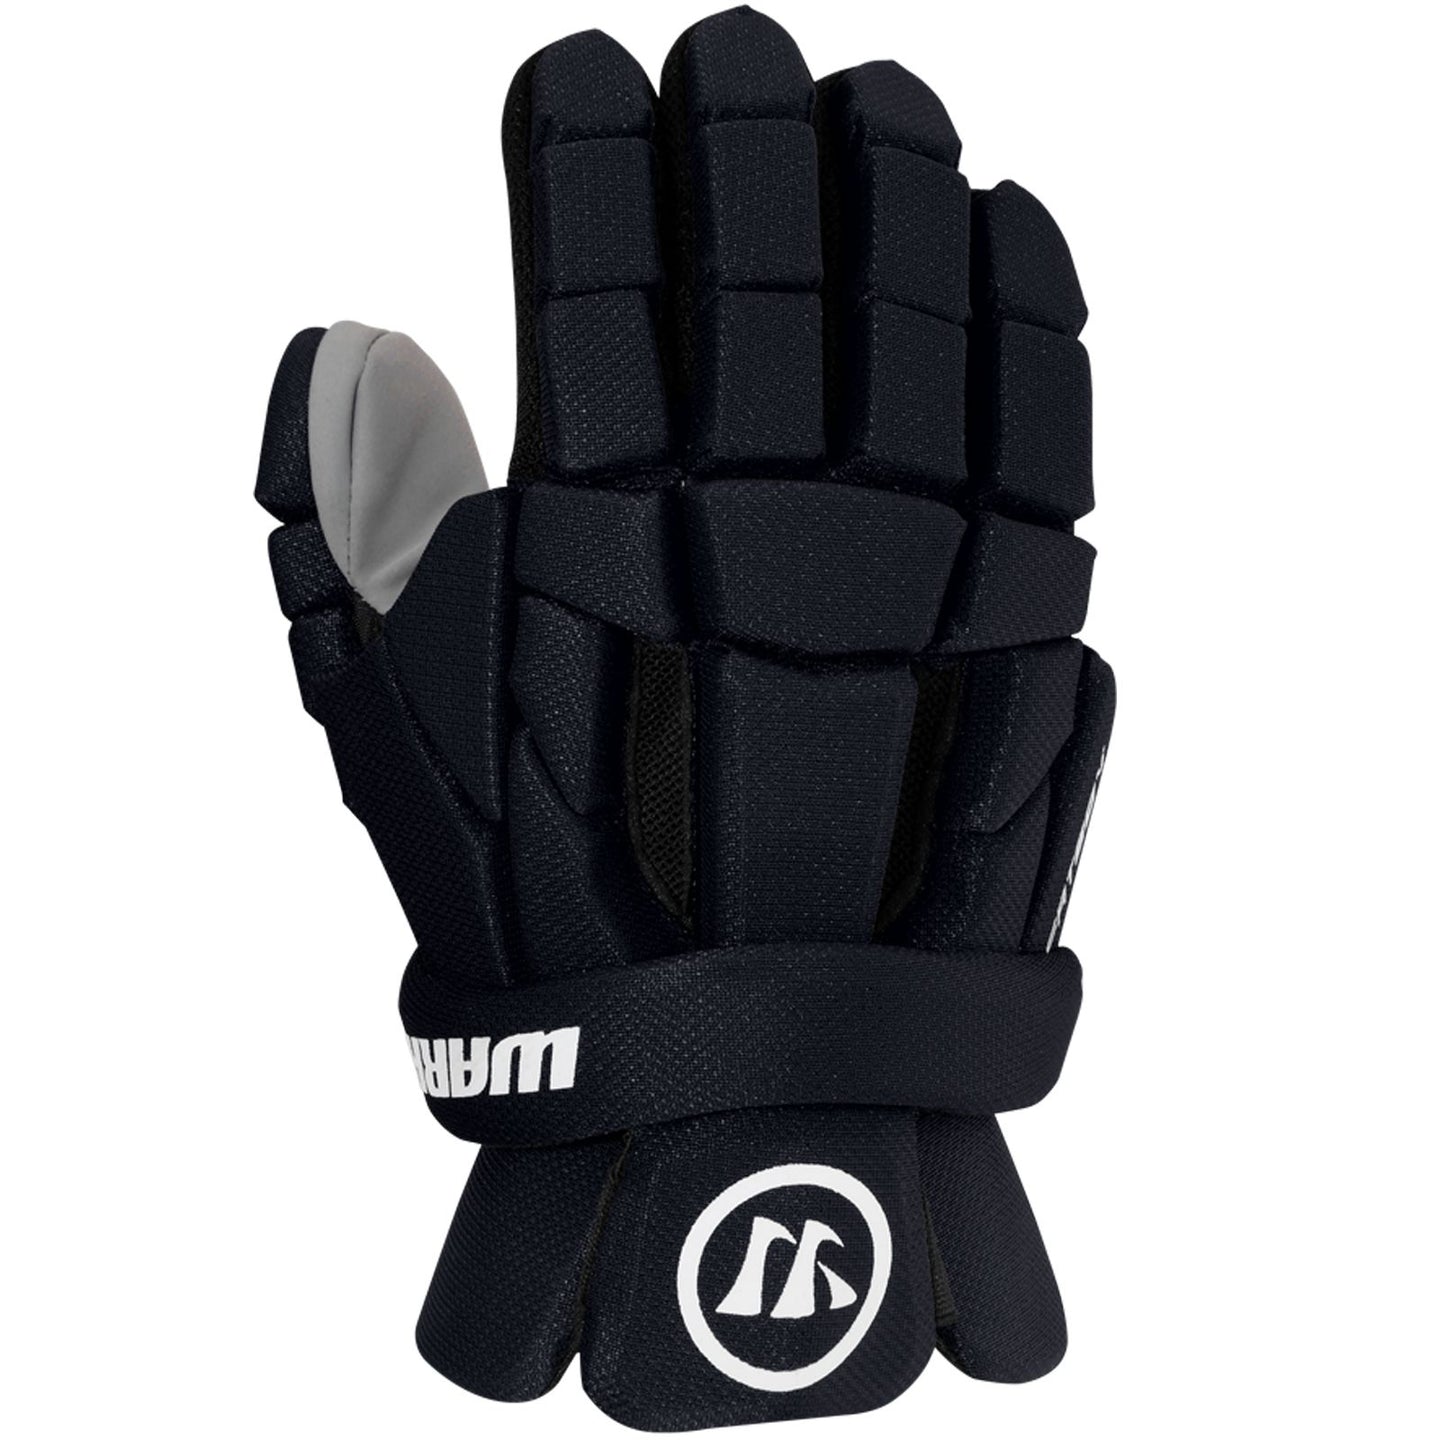 Picture of the black Warrior Fatboy Lite Lacrosse Gloves